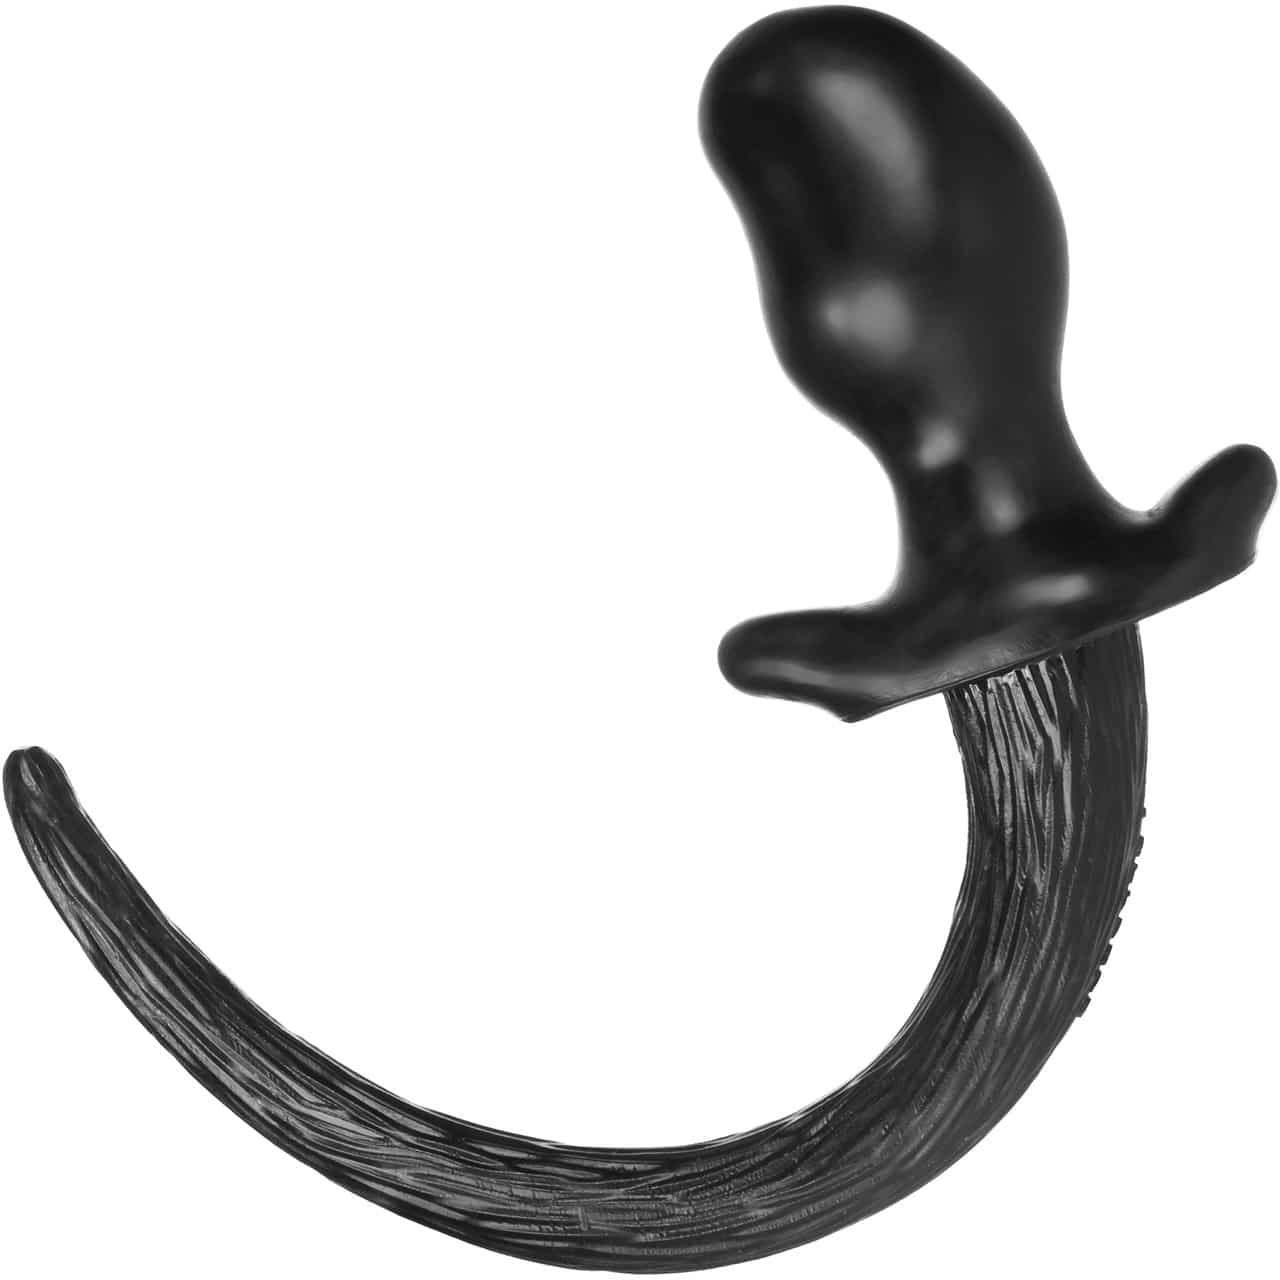 Oxballs Silicone Puppy Tail Anal Plug. Slide 2